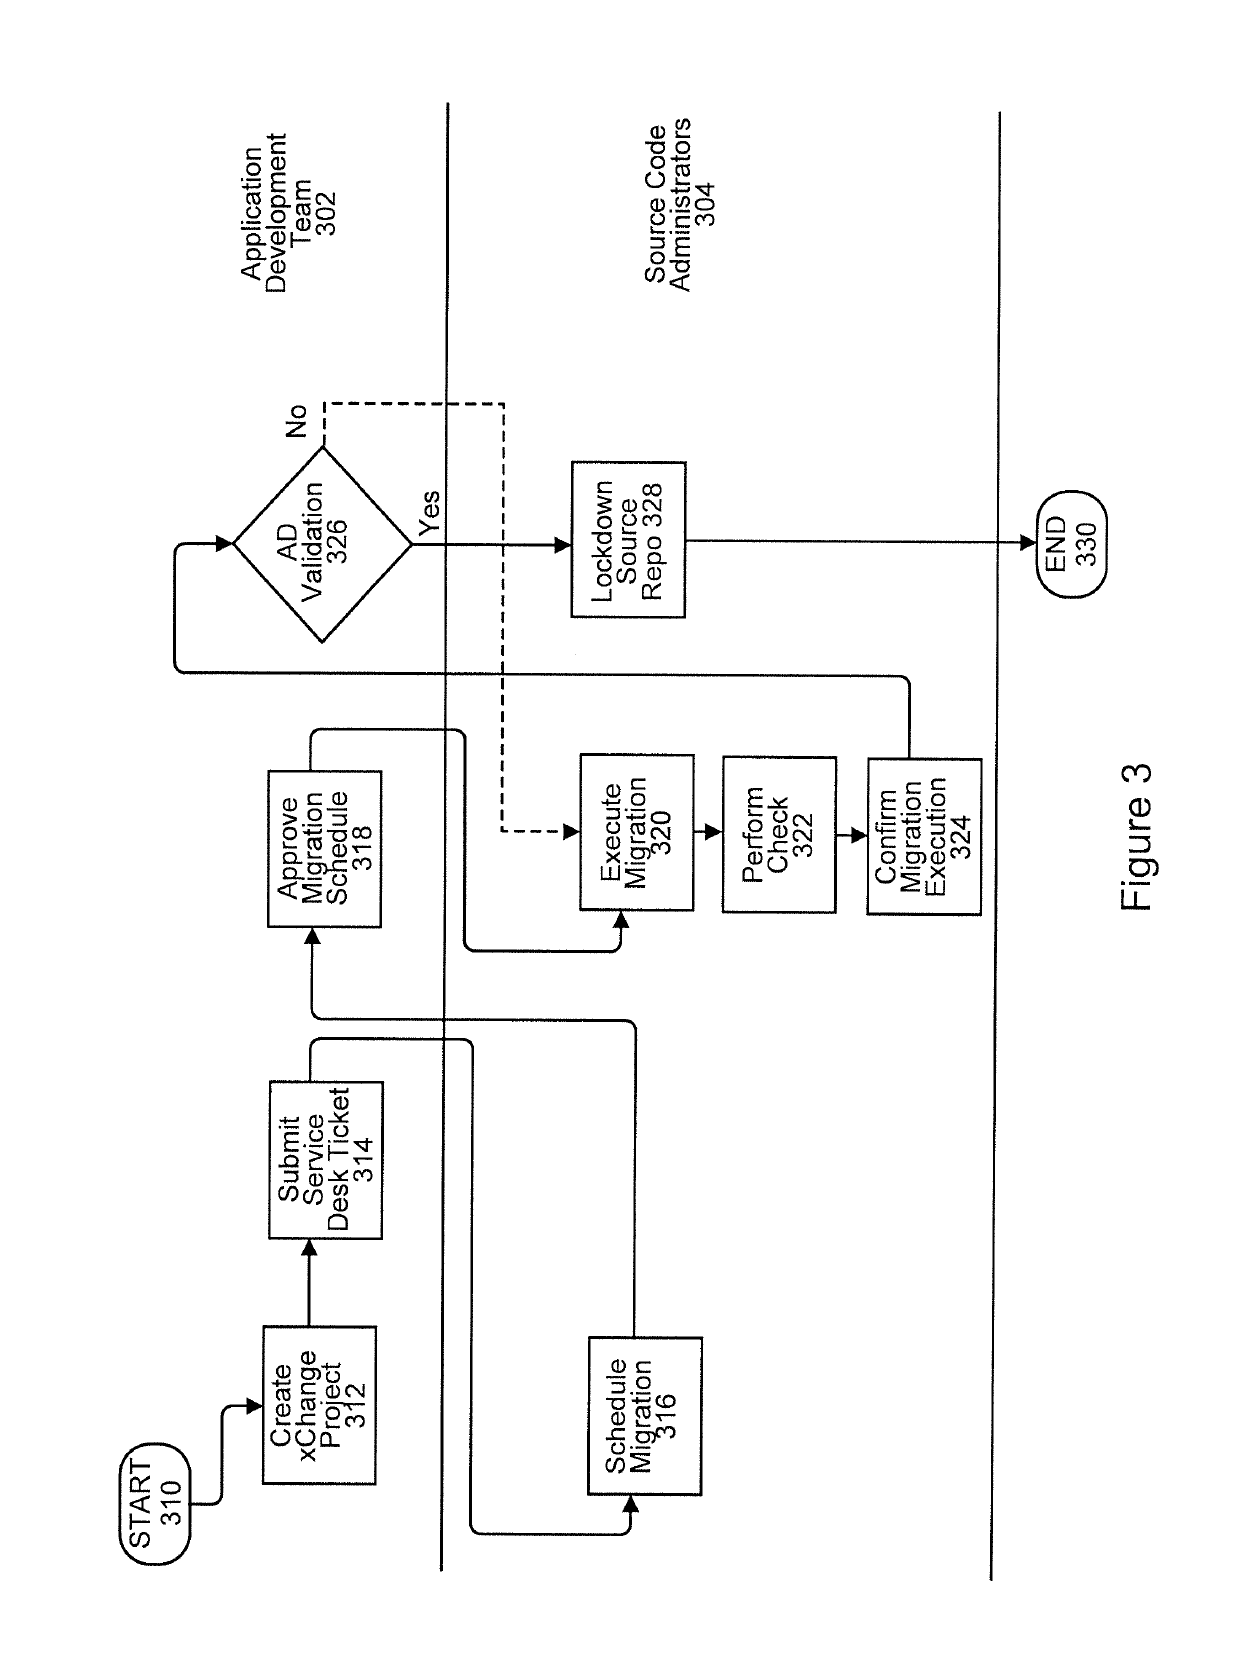 Method and system for implementing an automated migration tool